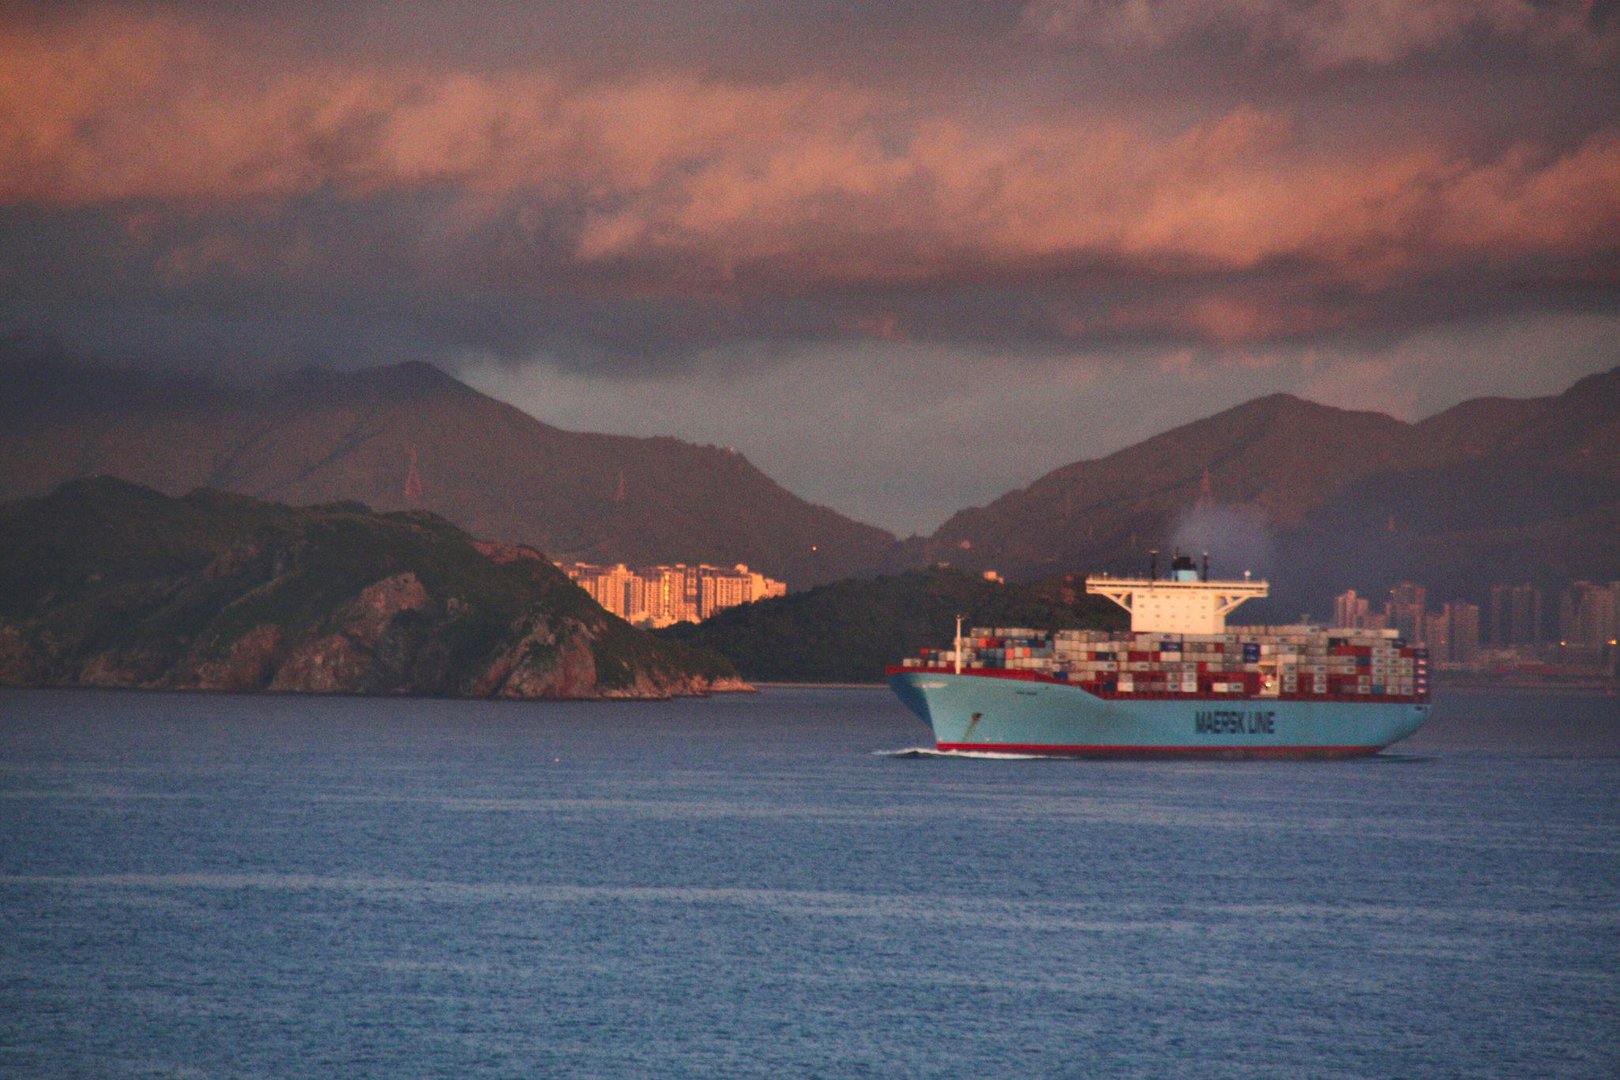 Emma Maersk in the morning light, Yantian/China